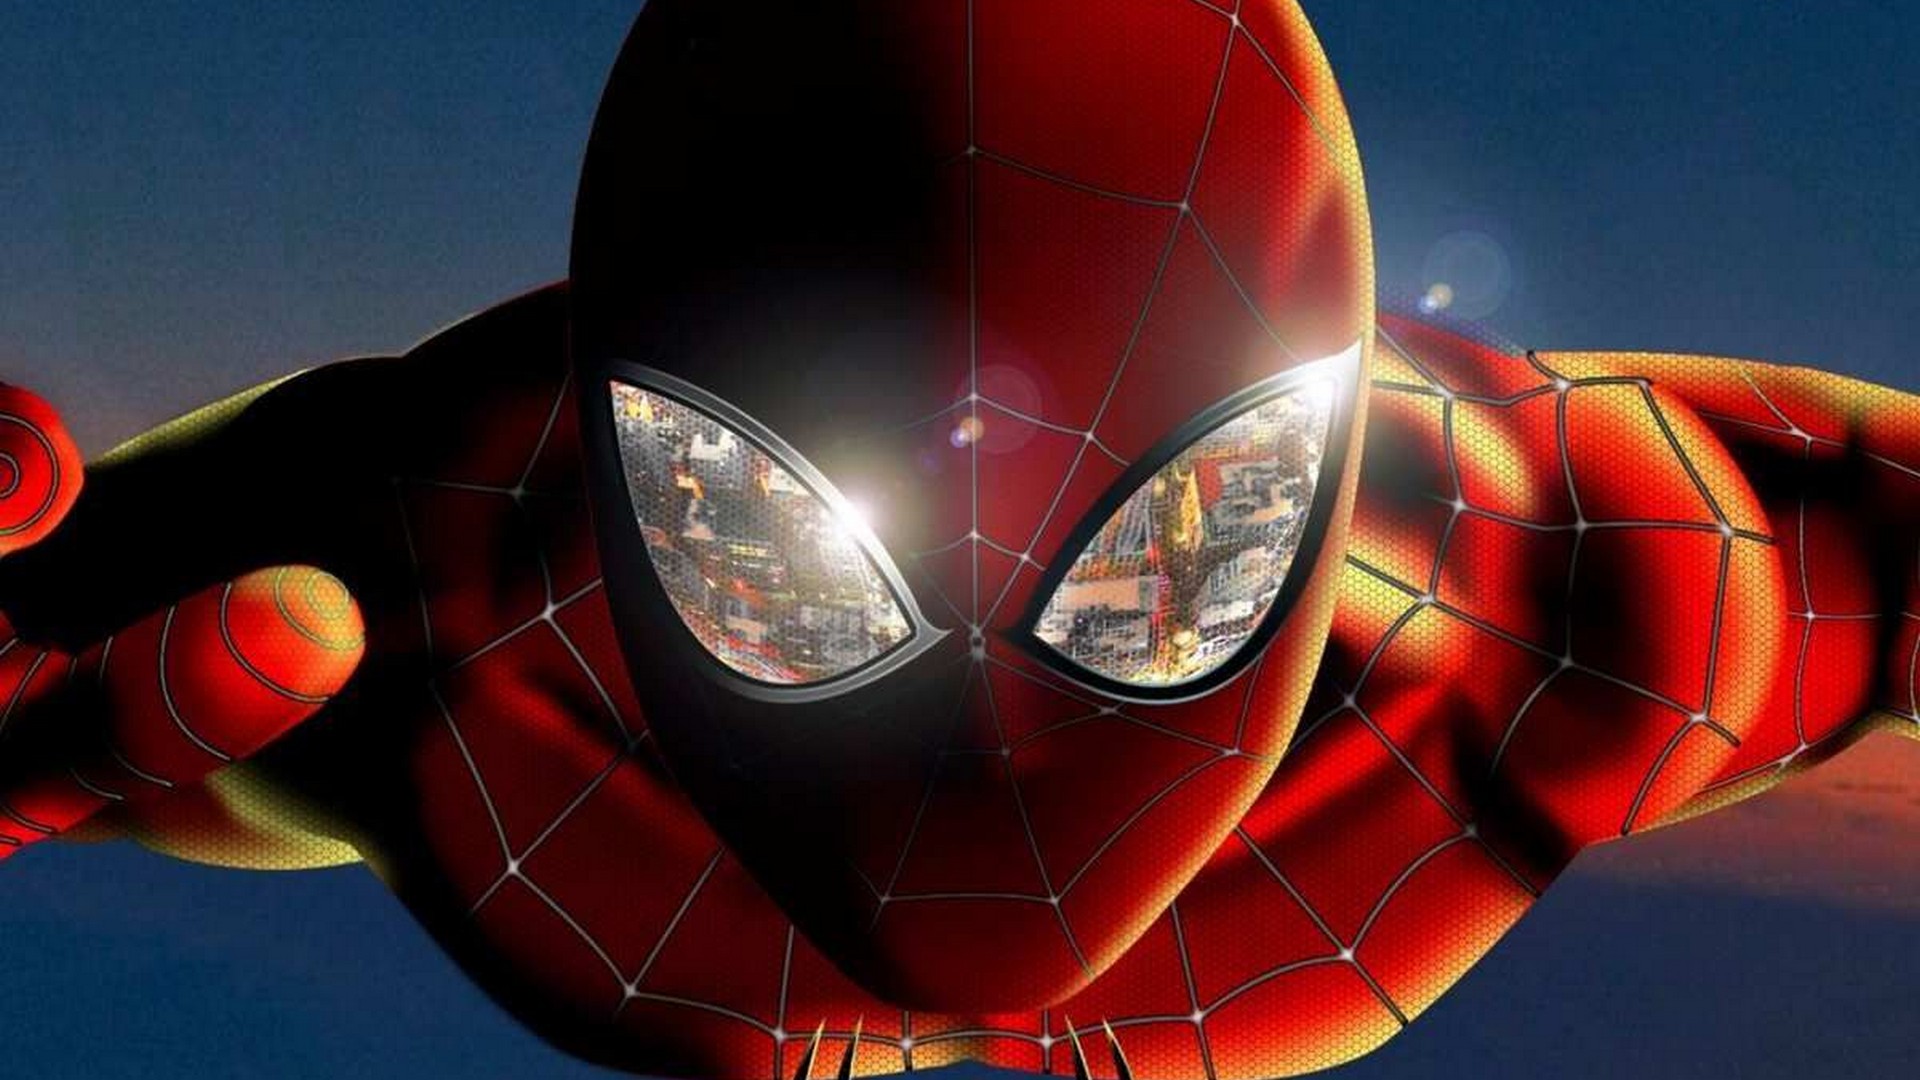 Spider-Man 2019 Far From Home Wallpaper HD with high-resolution 1920x1080 pixel. You can use this poster wallpaper for your Desktop Computers, Mac Screensavers, Windows Backgrounds, iPhone Wallpapers, Tablet or Android Lock screen and another Mobile device